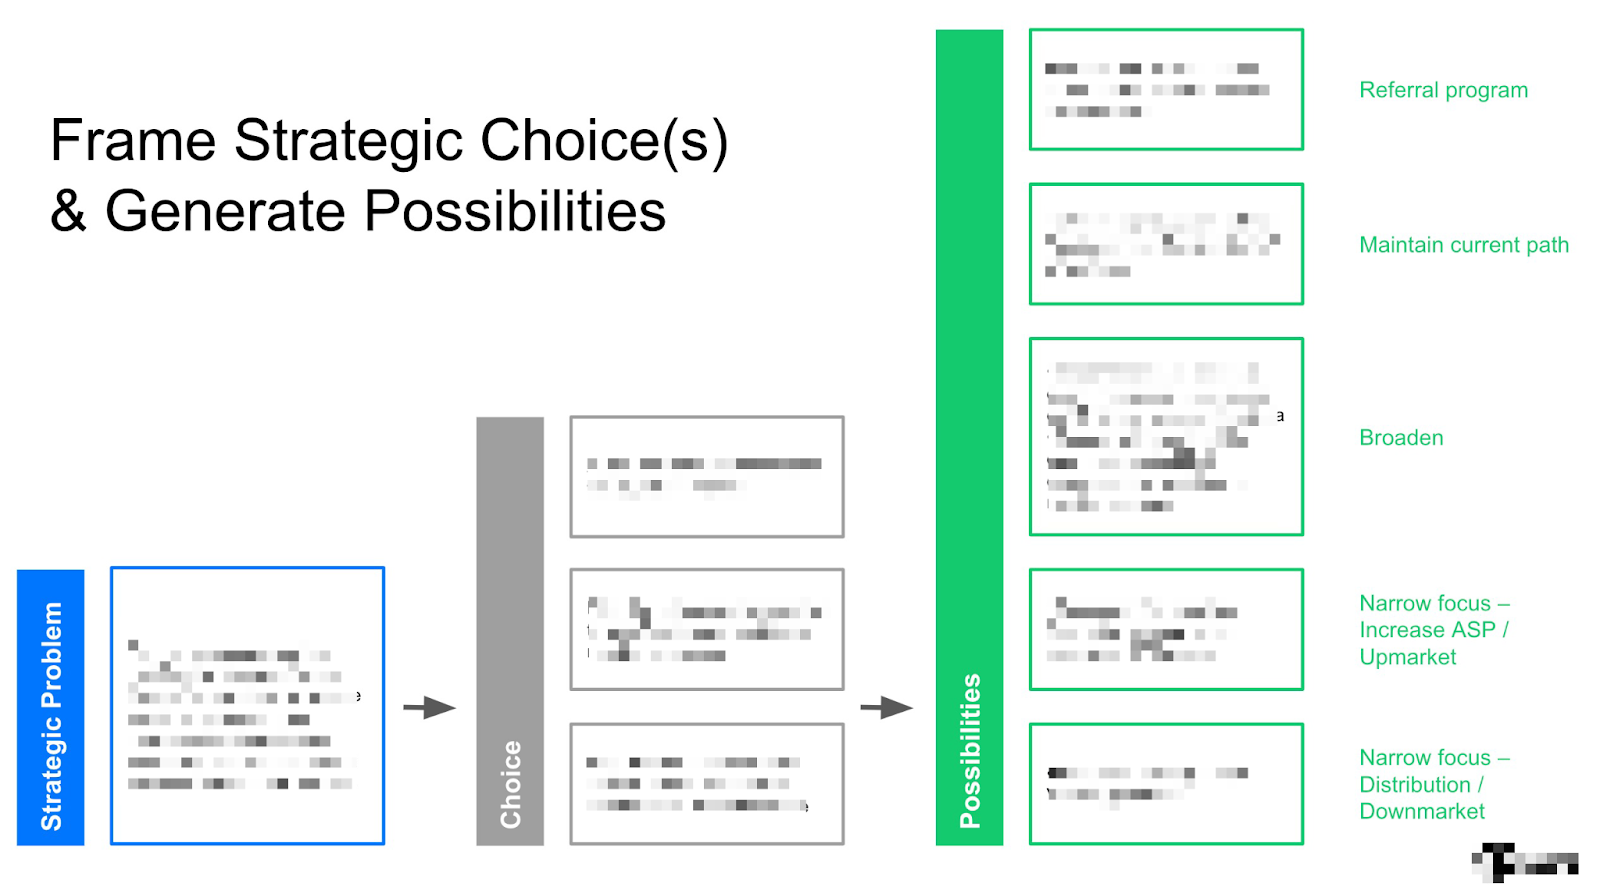 diagram about framing strategic choices and generating possibilites